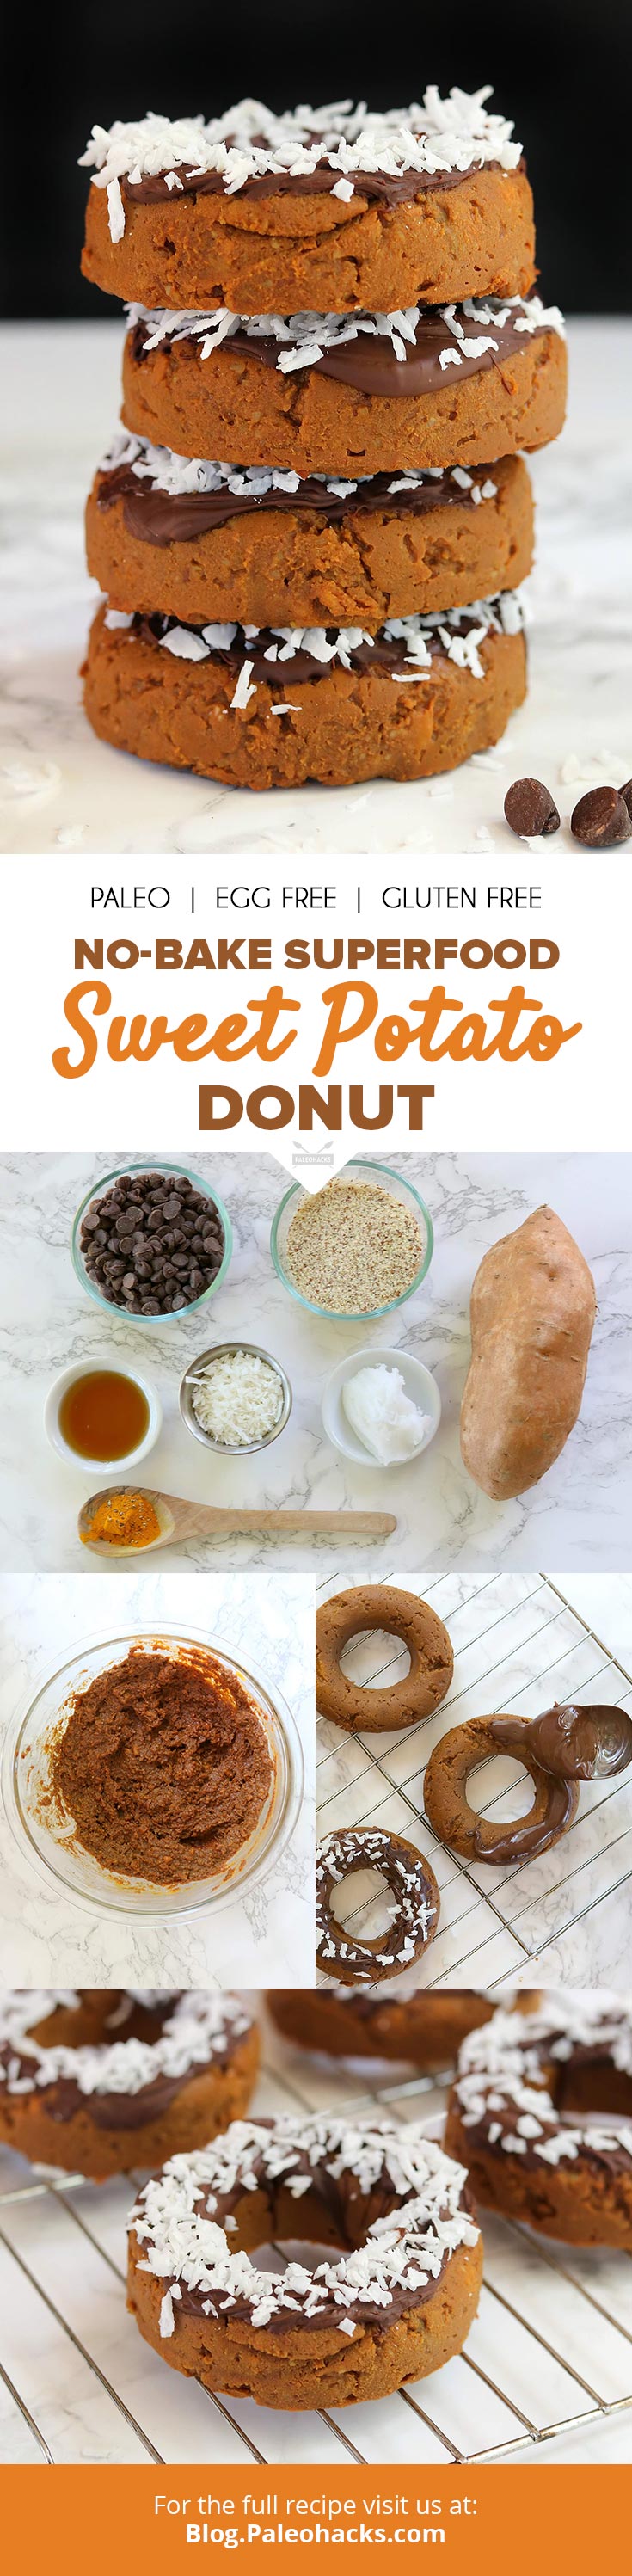 All the decadence of a donut without the processed ingredients and zero baking! These sweet potato, turmeric-packed donuts get dipped in antioxidant dark chocolate for a superfood treat.